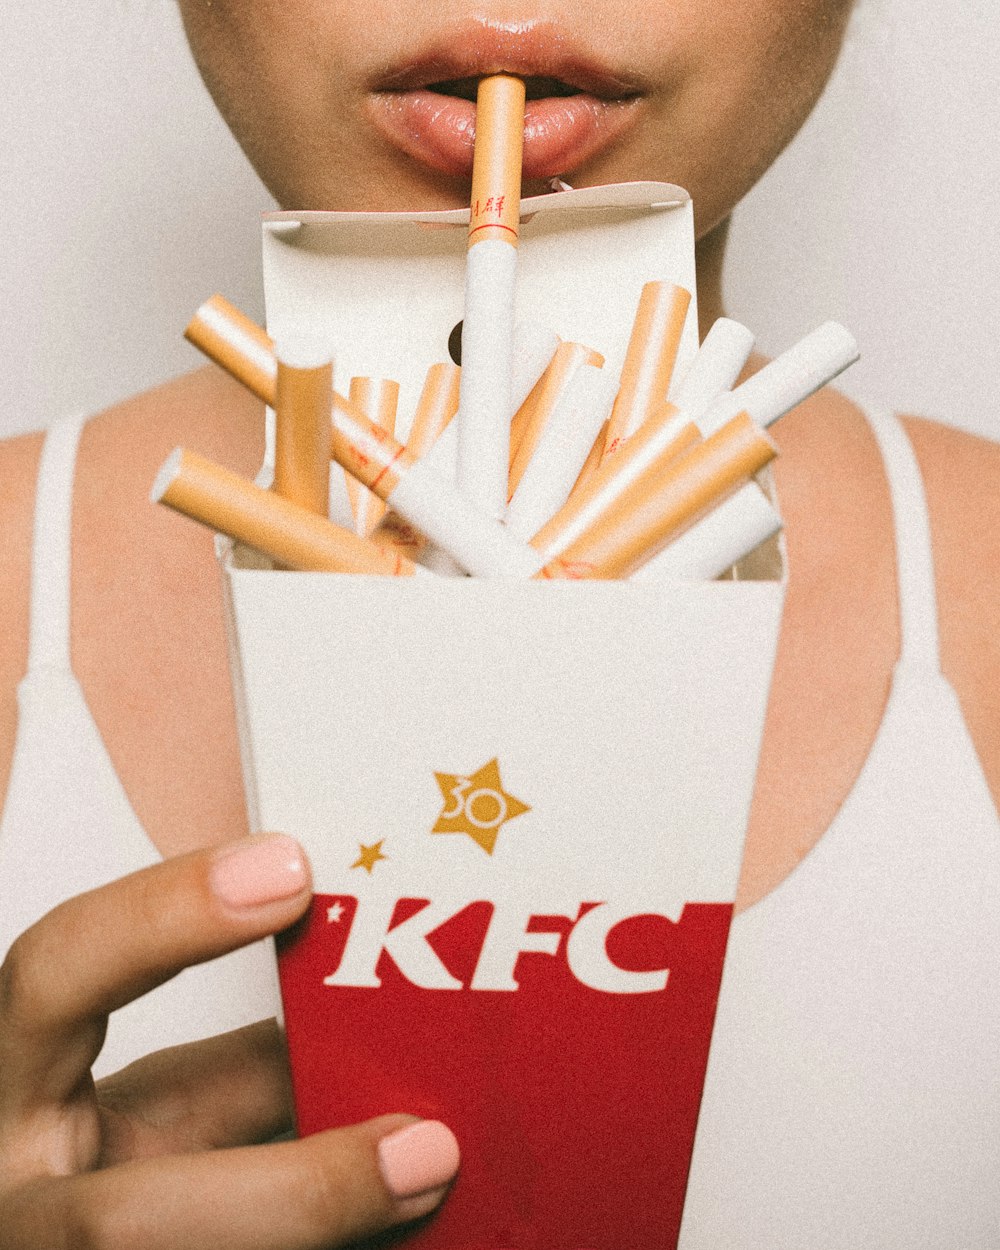 KFC bucket filled with cigarette